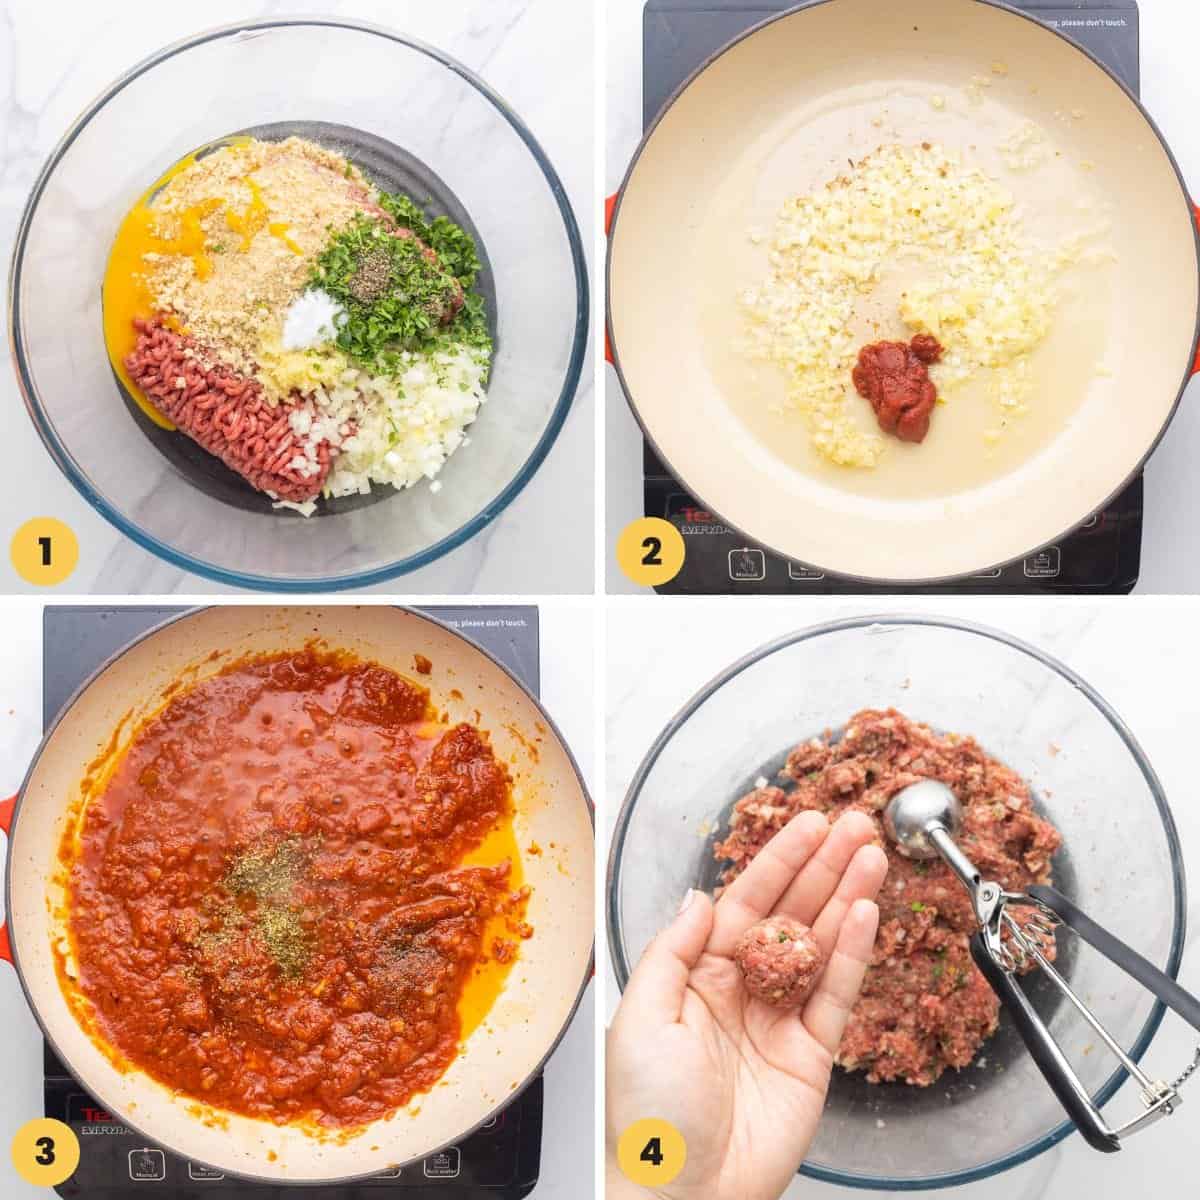 a collage of four images showing how to make homemade meatballs with ground beef and homemade tomato sauce.